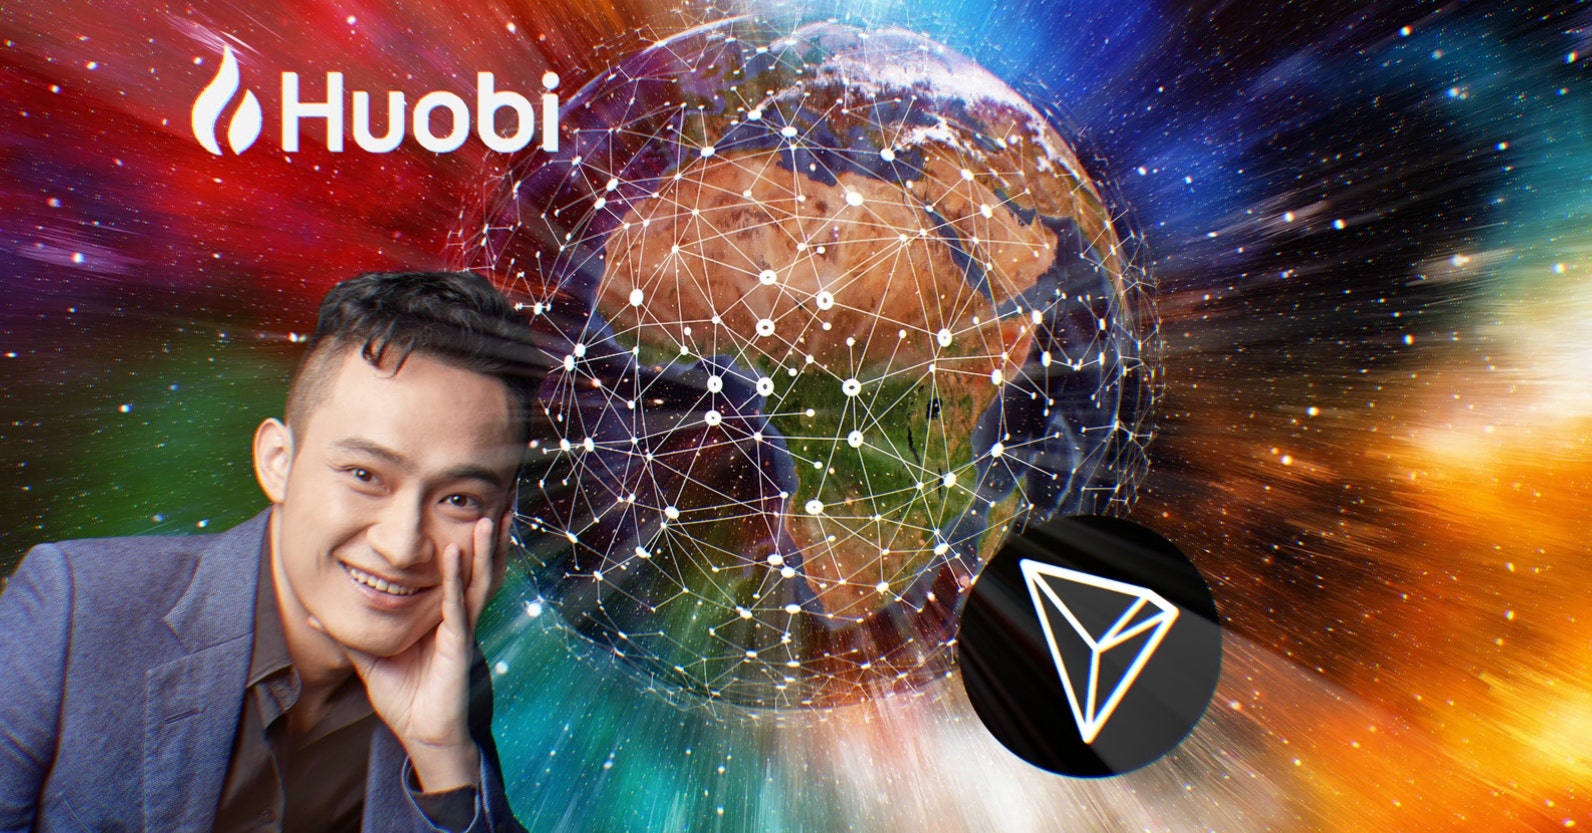 Tron's Justin Sun Says 'Ignore FUD and Keep Building' As Houbi Hemorrhages Investors, Staff, Reserves